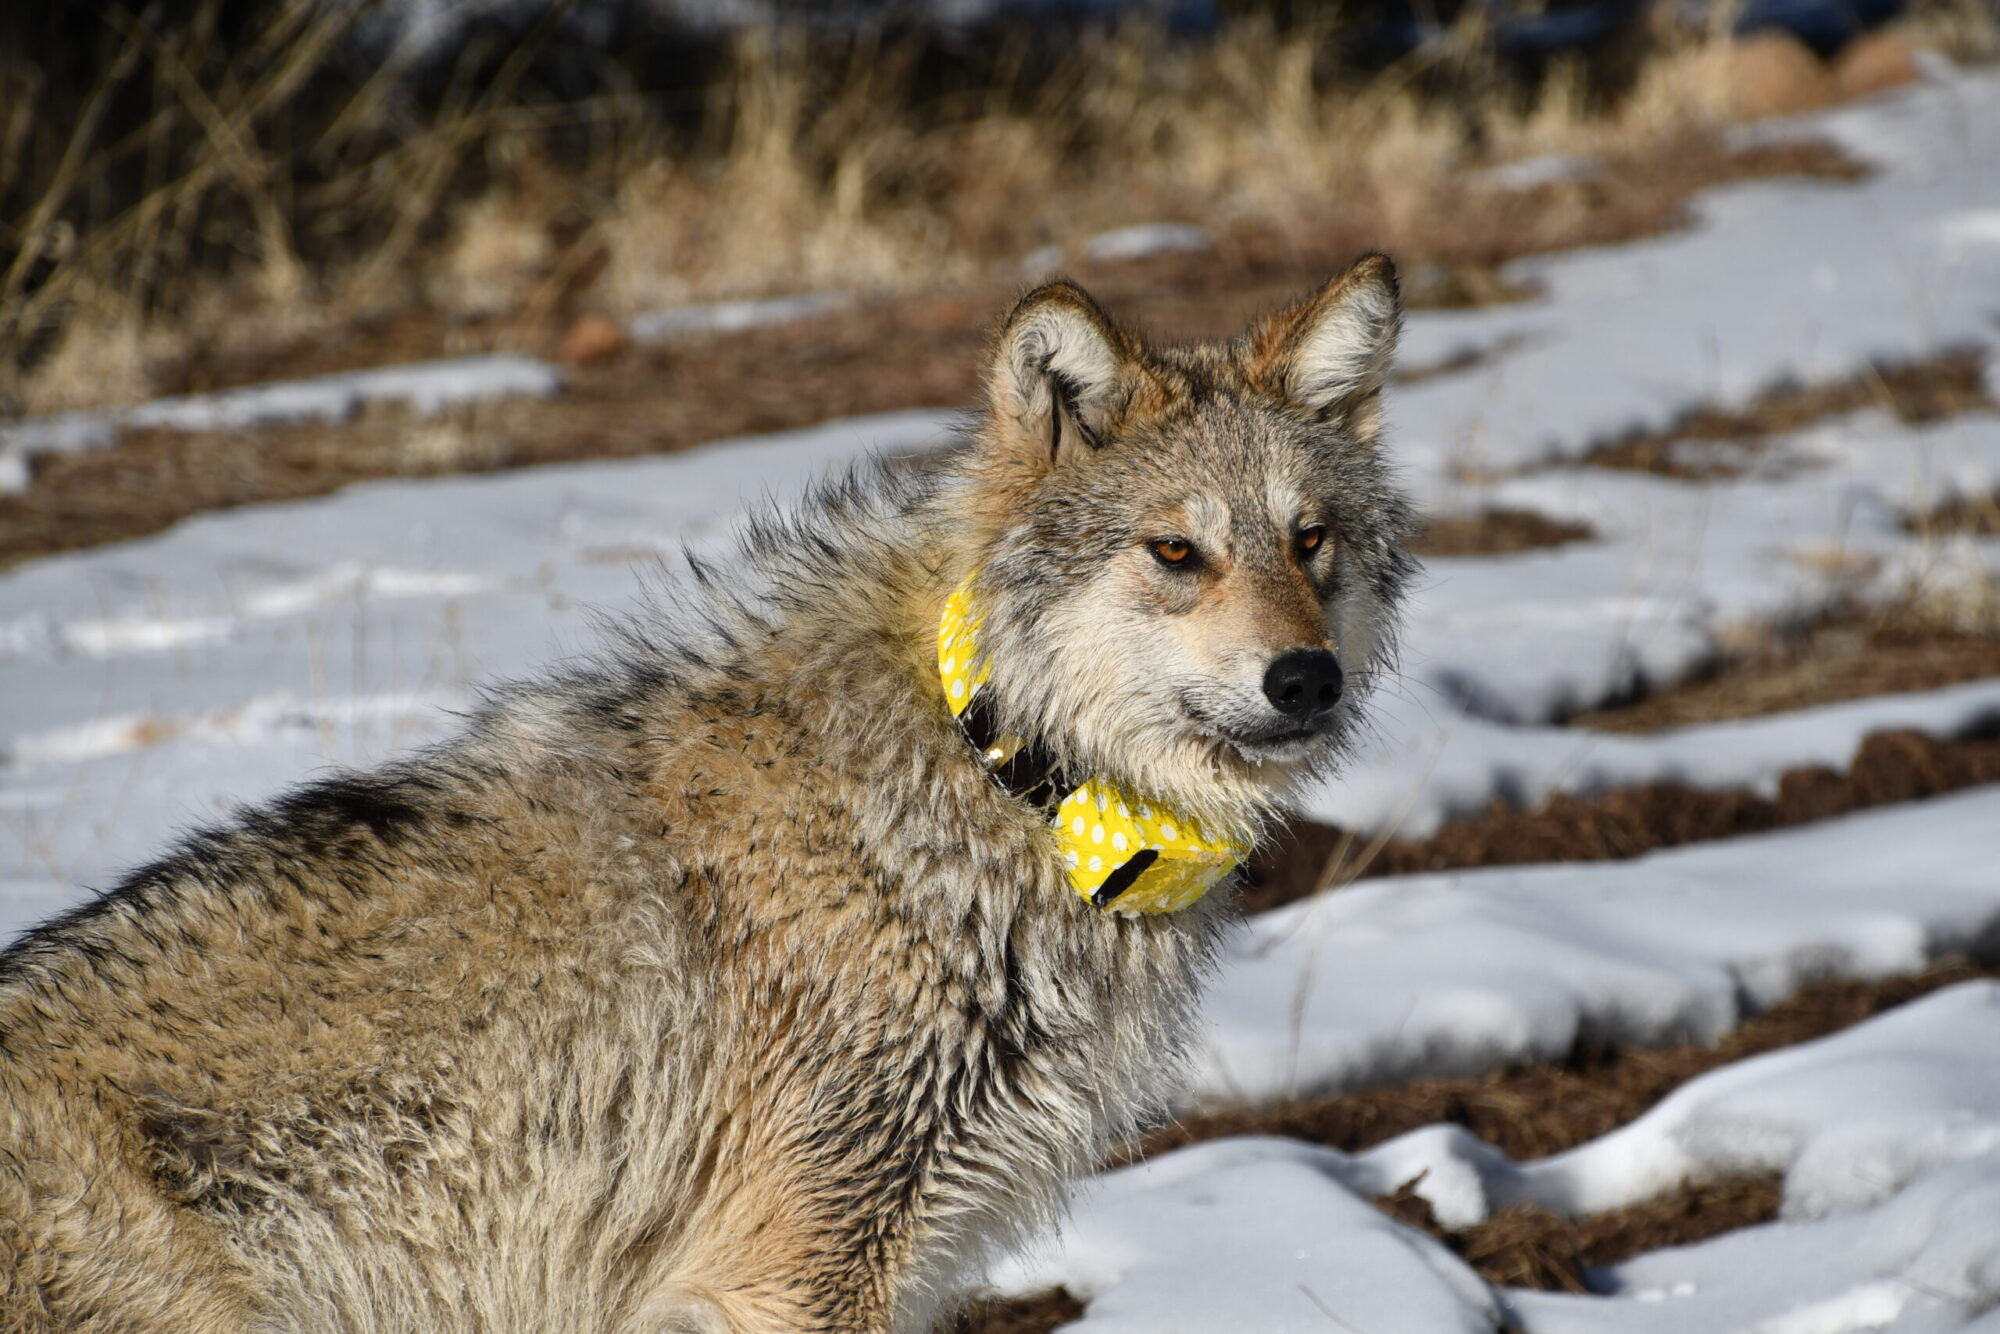 Mexican wolf population passes 200